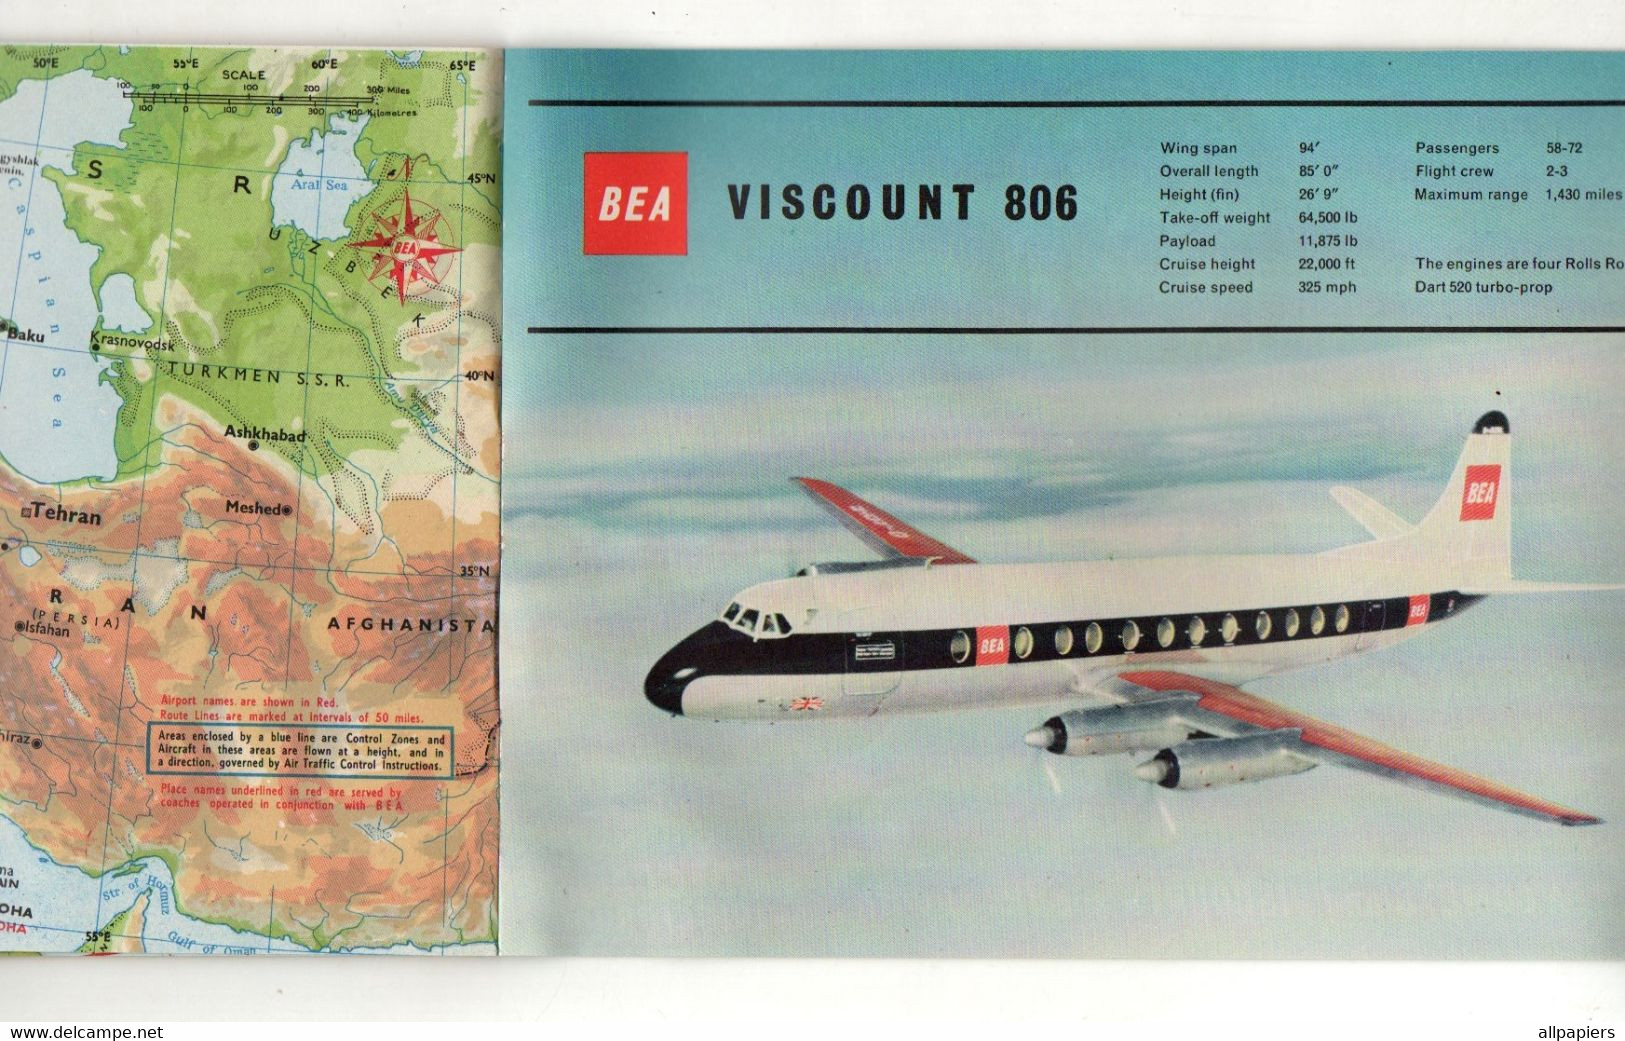 Safety On Board - Maps - Reservation Offices - About Your Flight For You To keep BEA - Format : 23x16.5 Cm - Manuels